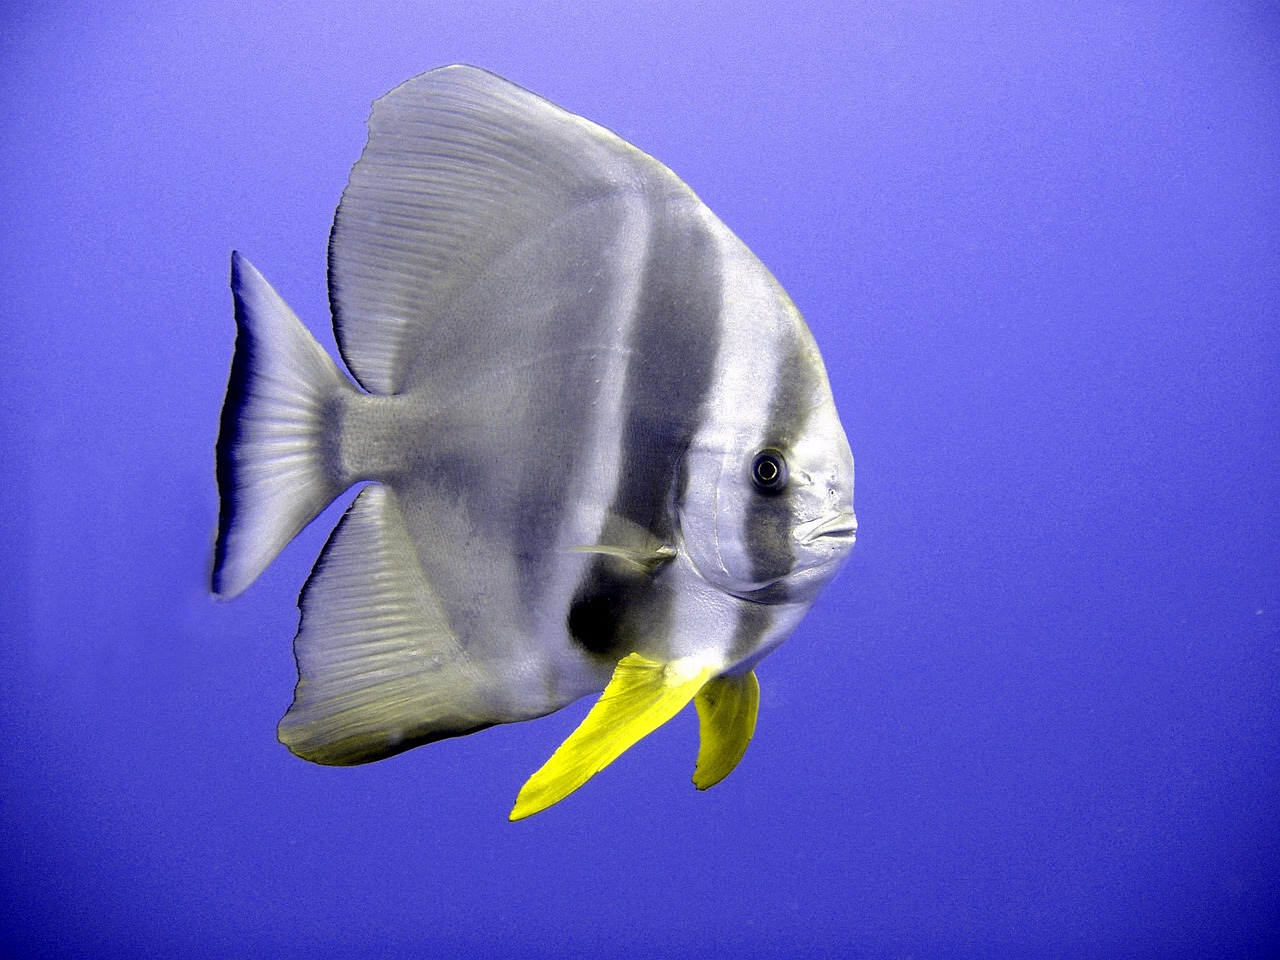 a close up of a fish on a blue background, by Hans Werner Schmidt, flickr, silver and yellow color scheme, award - winning photo. ”